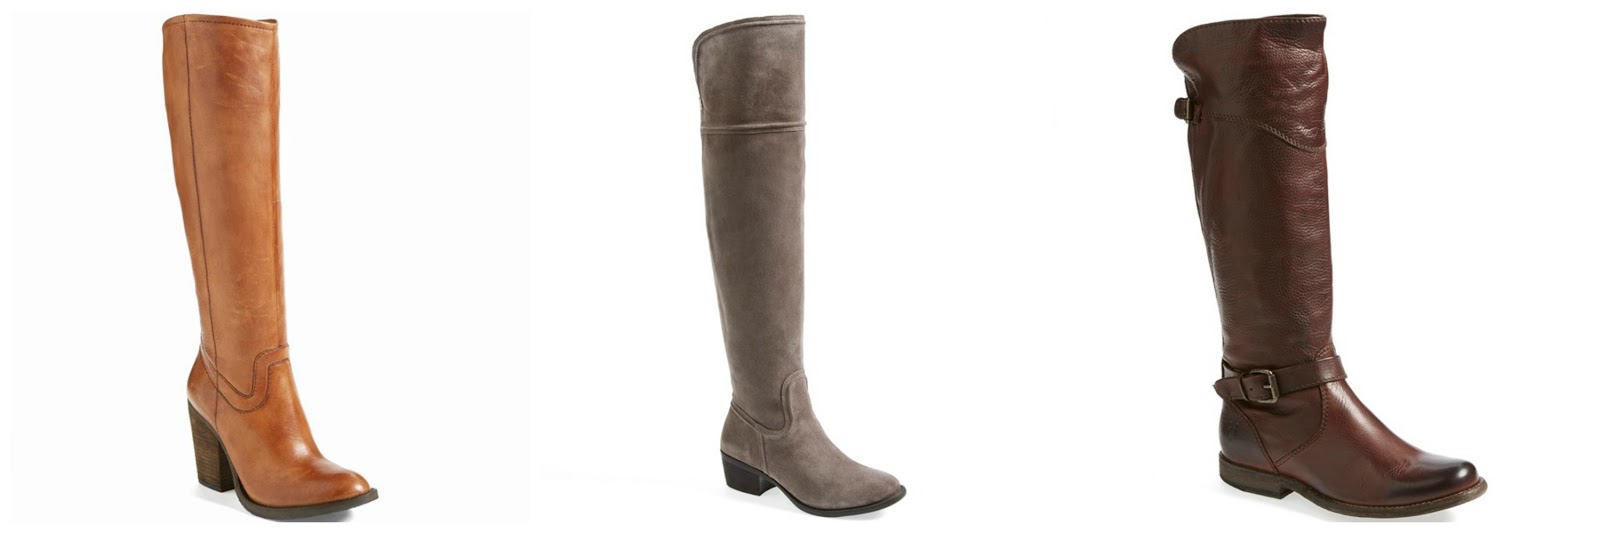 High Steve Madden Boots (in 2 colors), Grey Suede , Frye Riding Boot ...